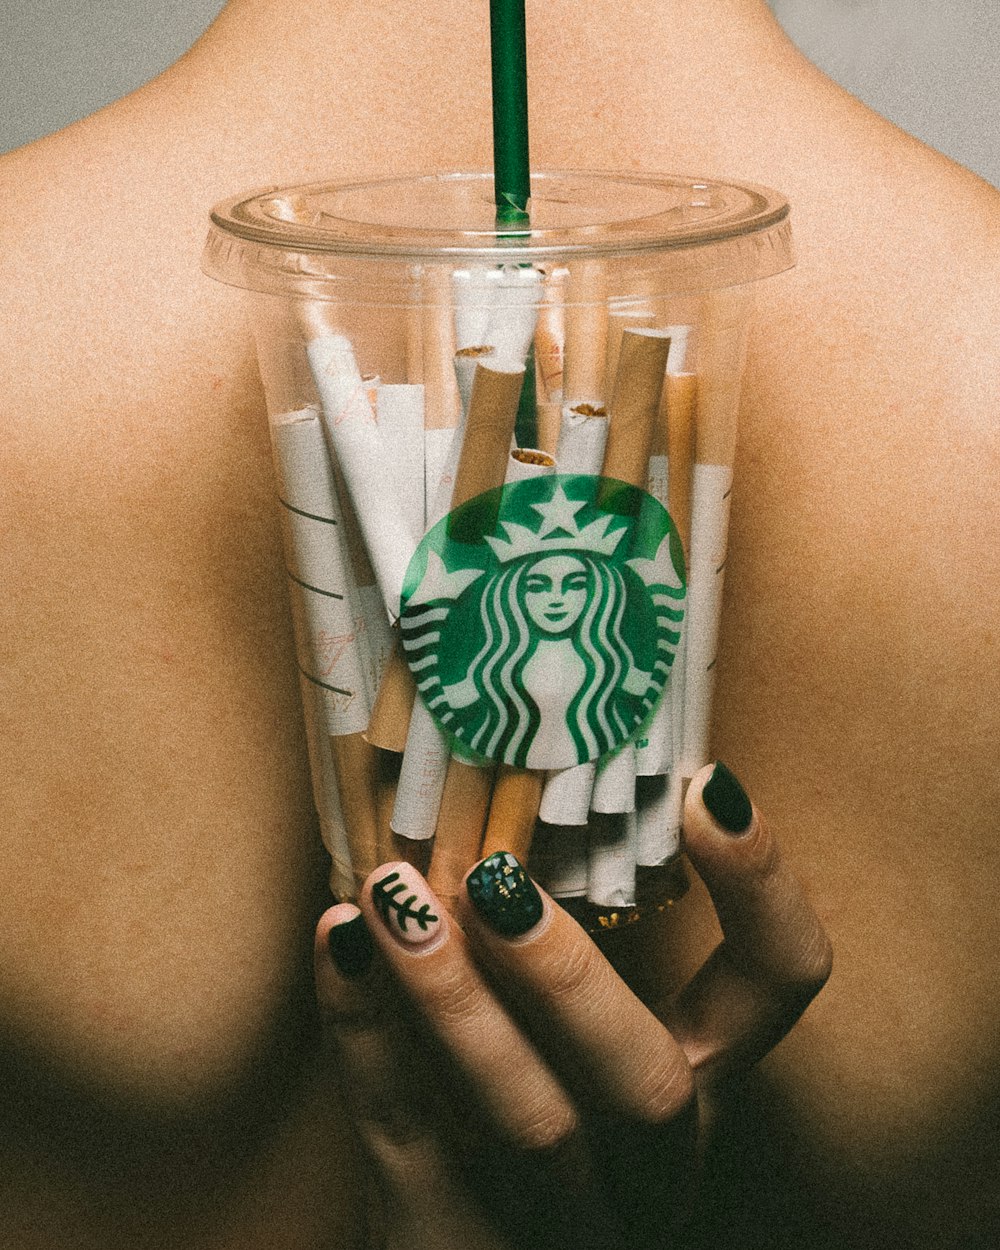 cigarette sticks inside clear Starbucks cup with lid and straw